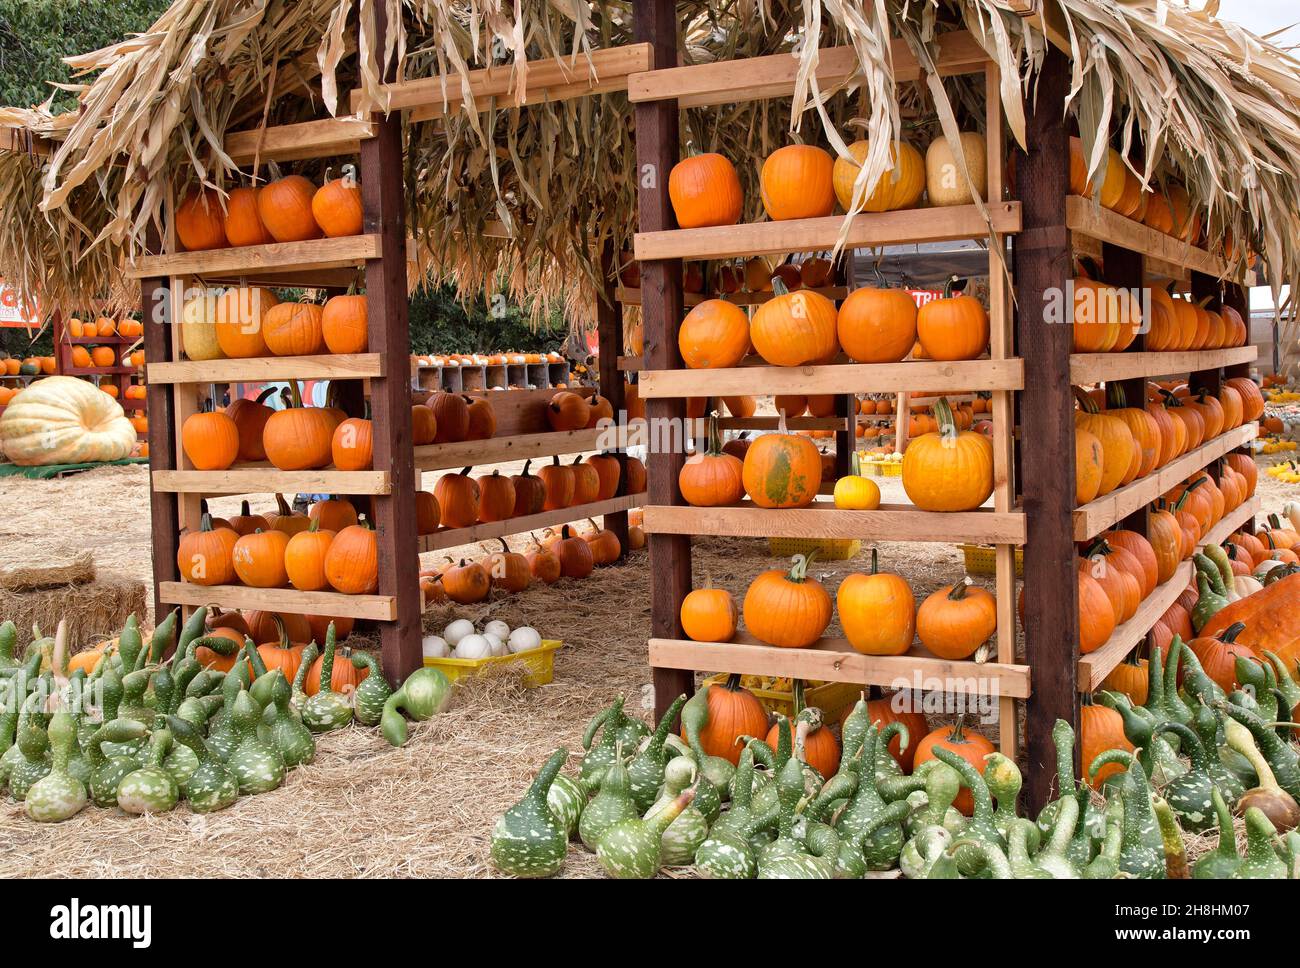 Harvest time,  farm stand displaying  pumpkins, & Speckled Swan gourds. Stock Photo